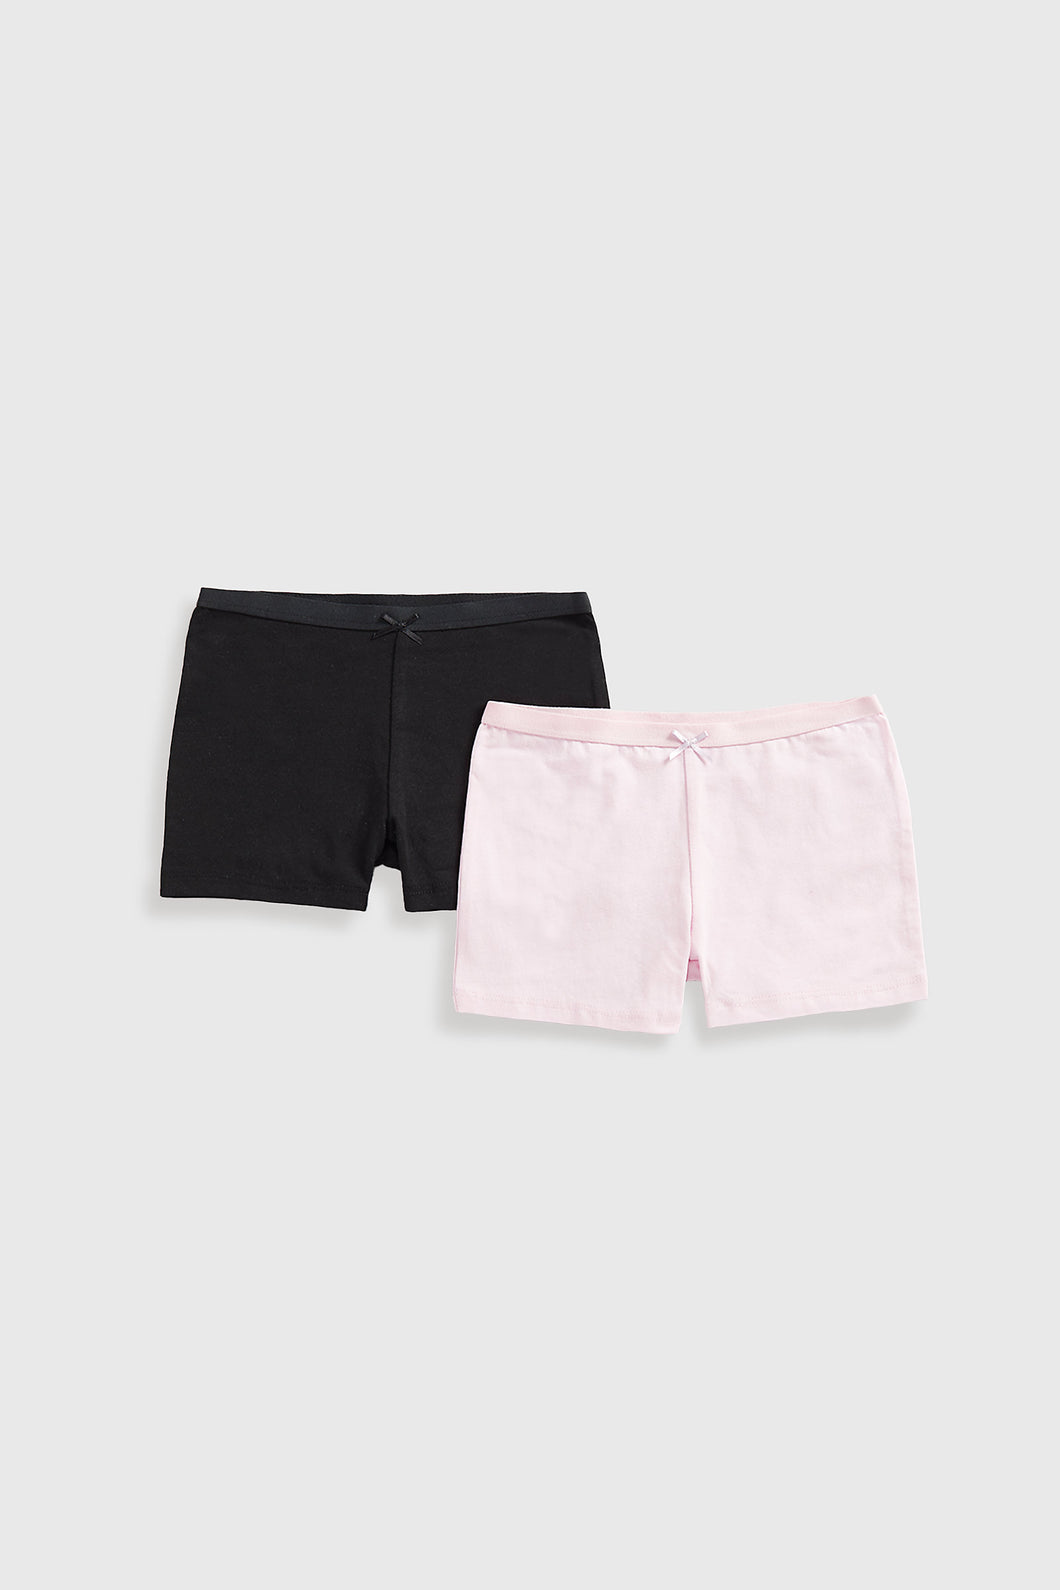 Mothercare Black And Nude Shorts - 2 Pack